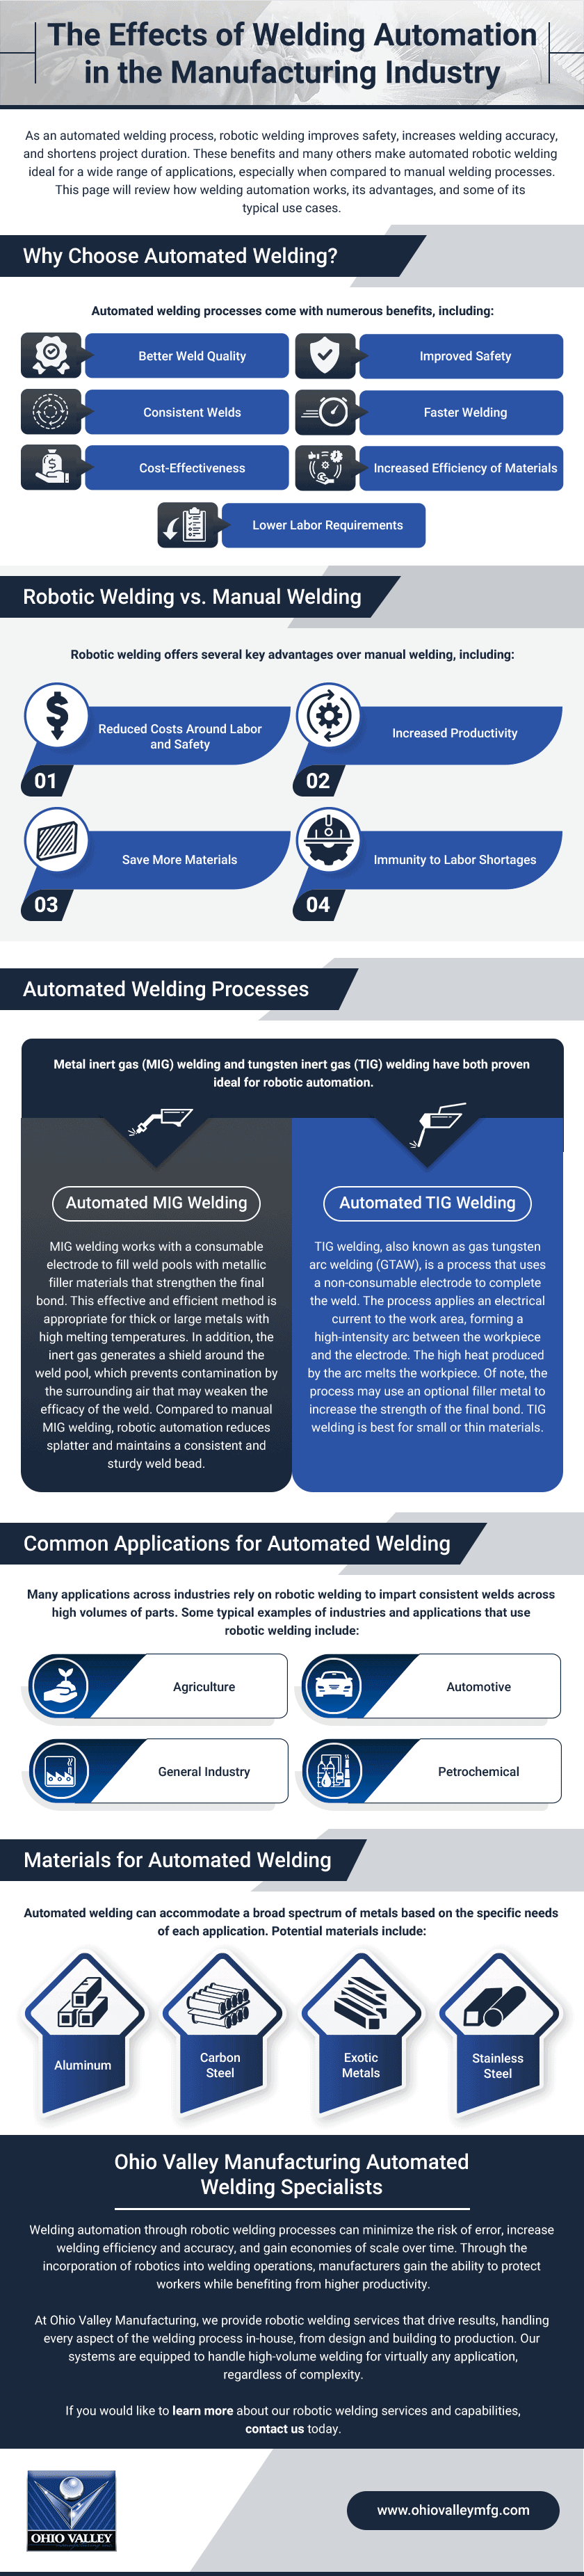 The Effects of Welding Automation in the Manufacturing Industry